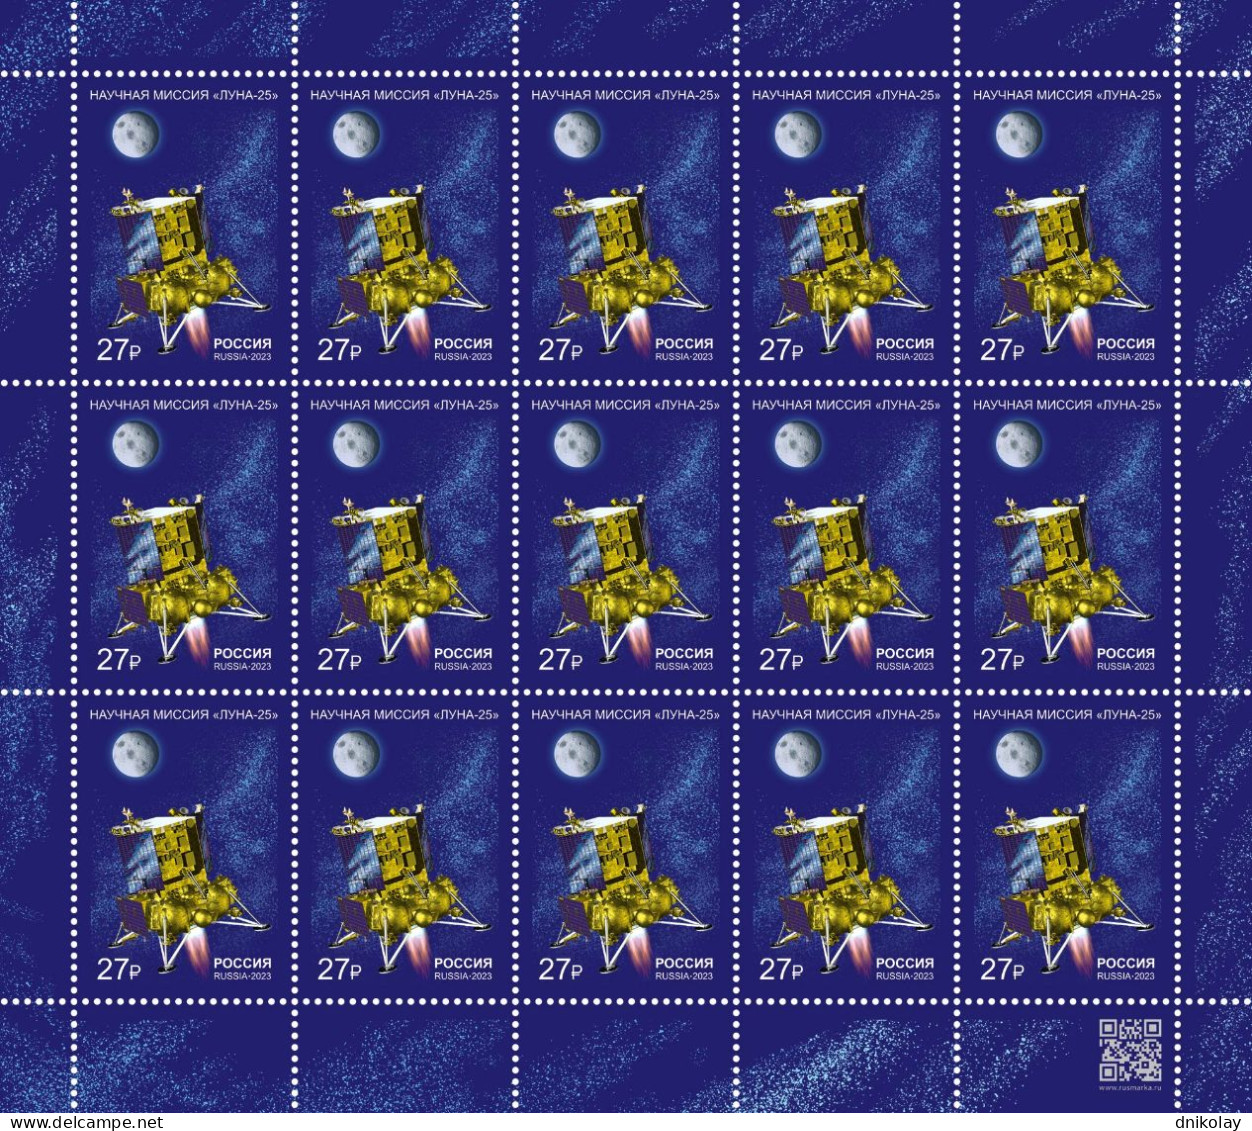 2023 3383 Russia Space Projects Of Russia - Scientific Mission Of Luna-25 MNH - Neufs